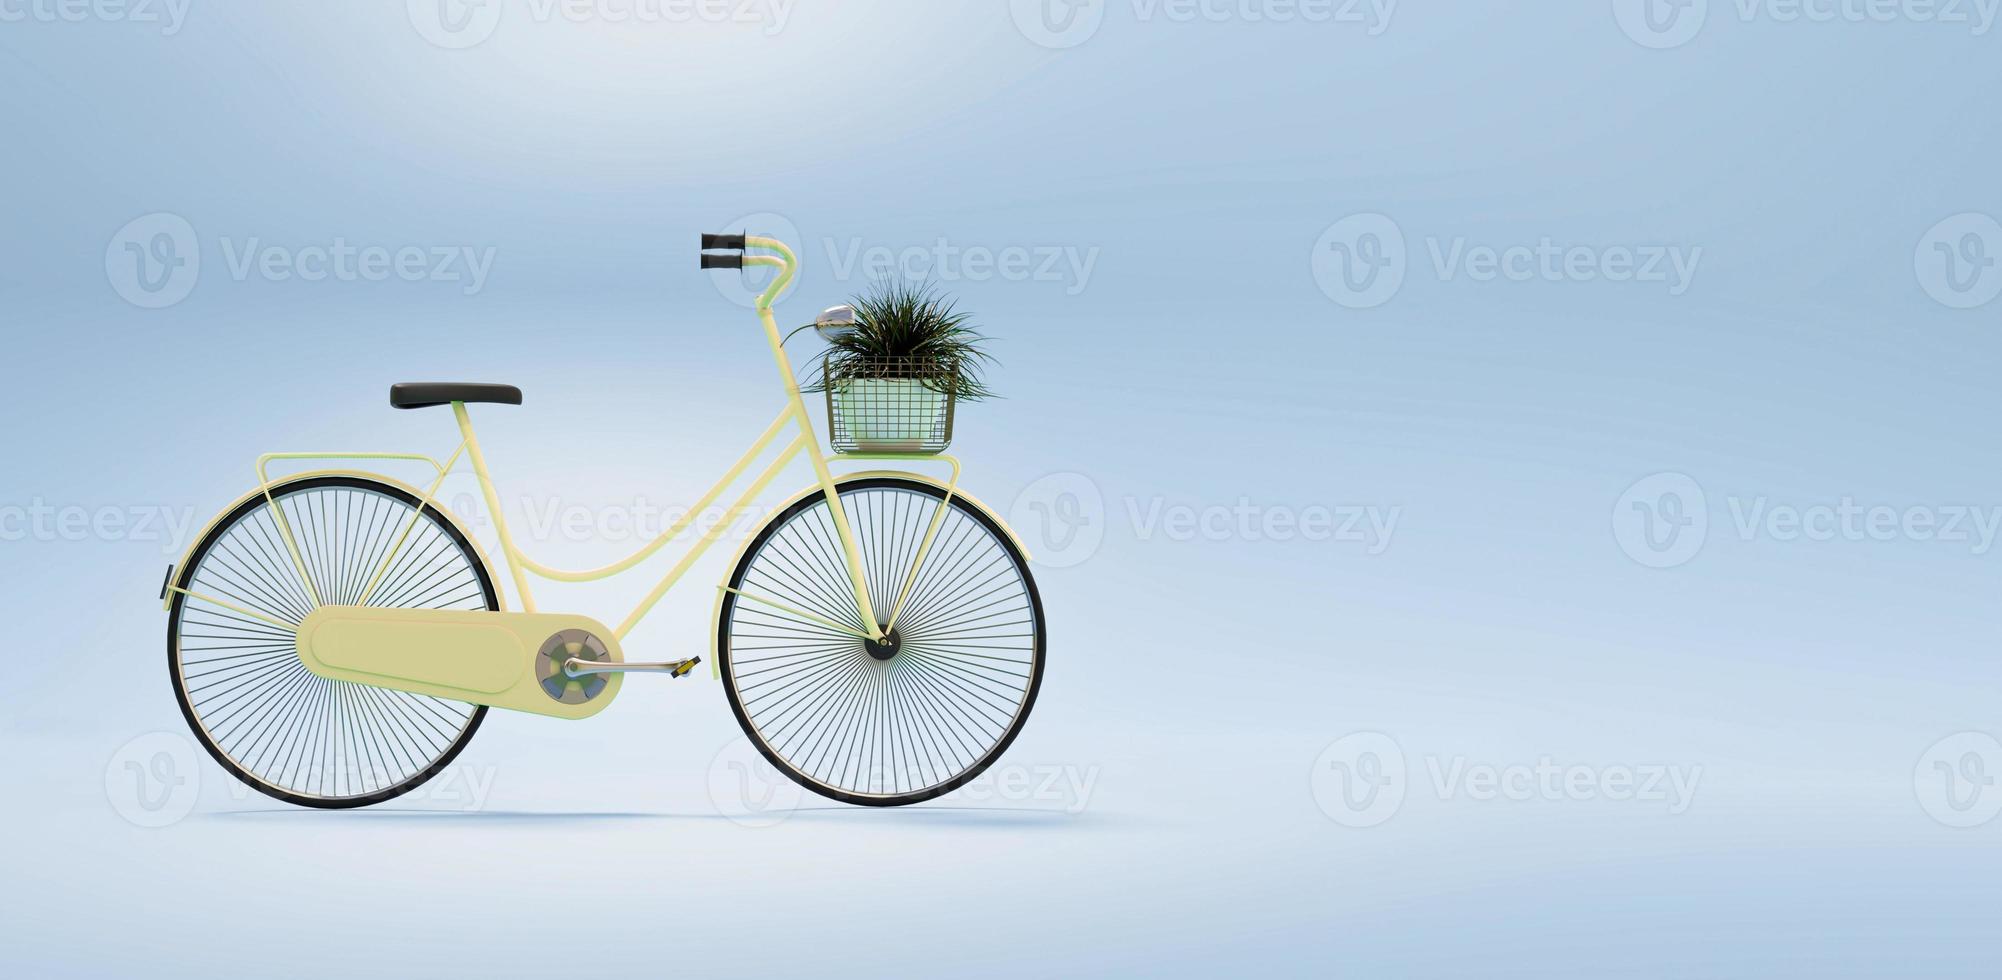 Vintage bicycle with tree pot in basket photo